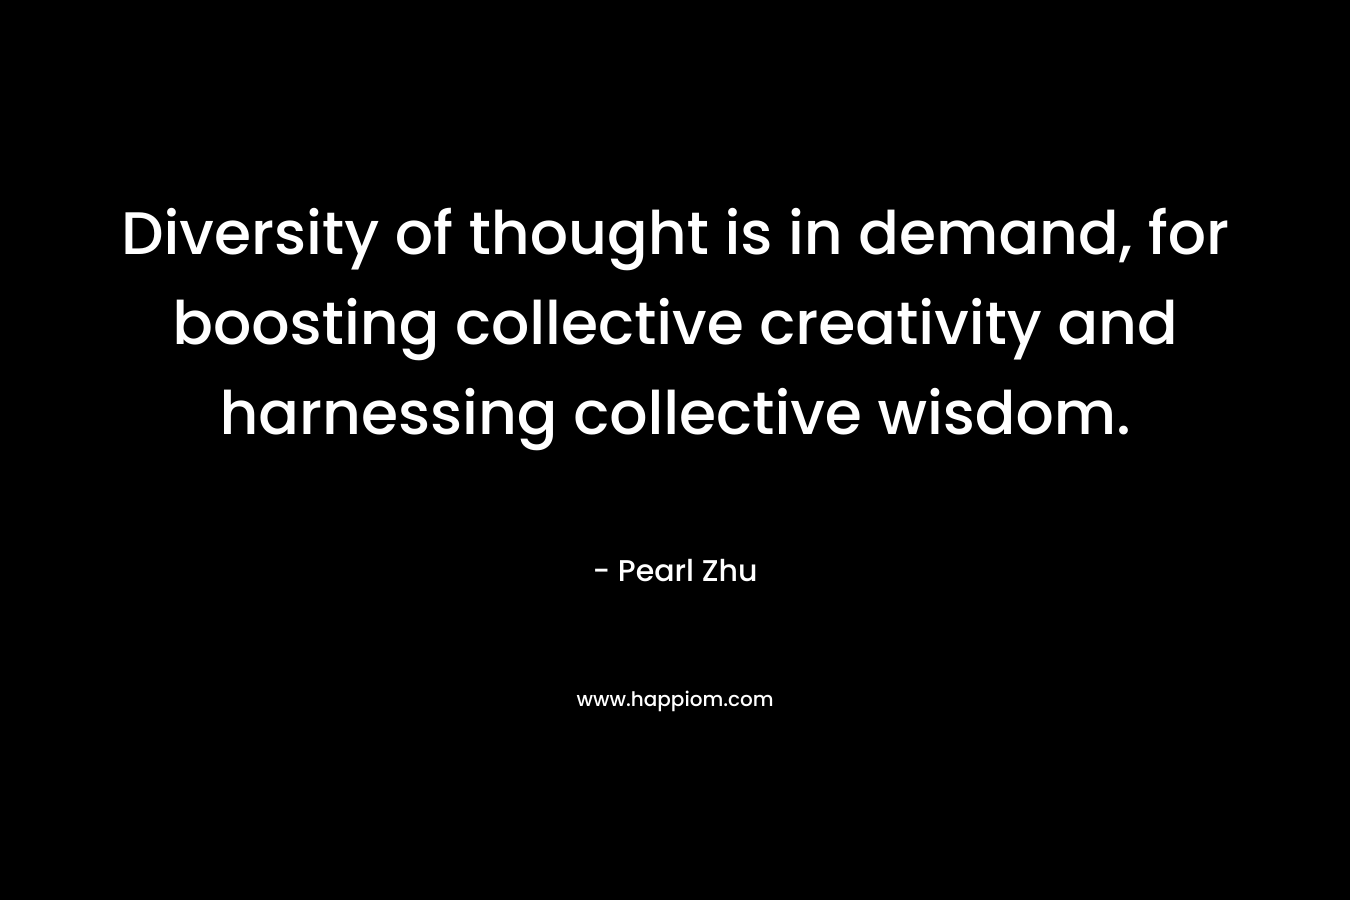 Diversity of thought is in demand, for boosting collective creativity and harnessing collective wisdom.